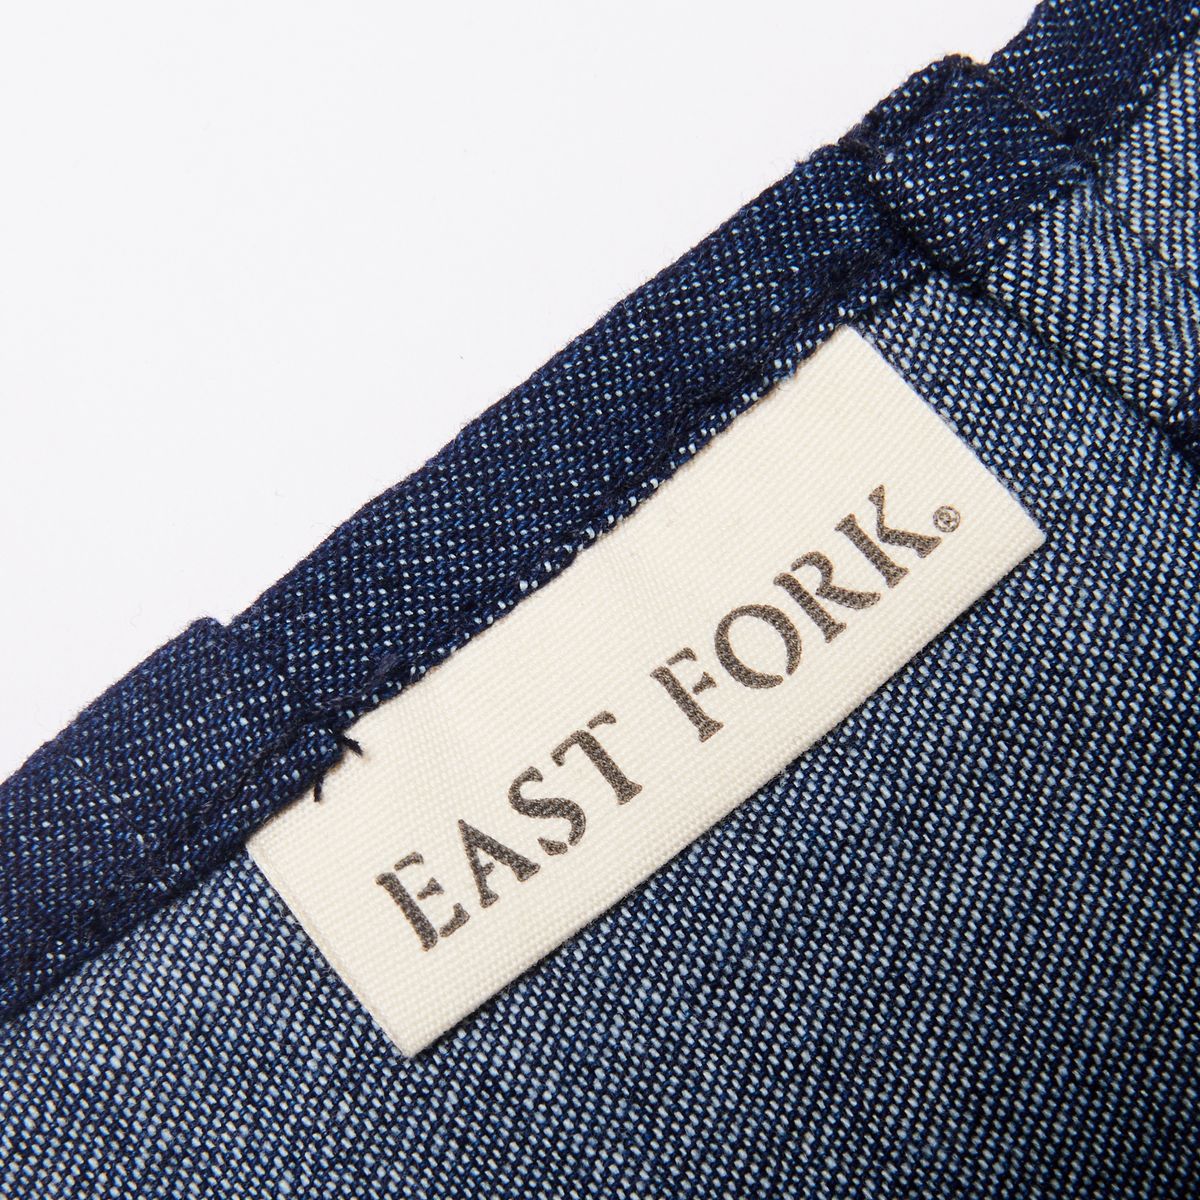 White tag sewn into the inside of a denim blue apron that reads 'East Fork'